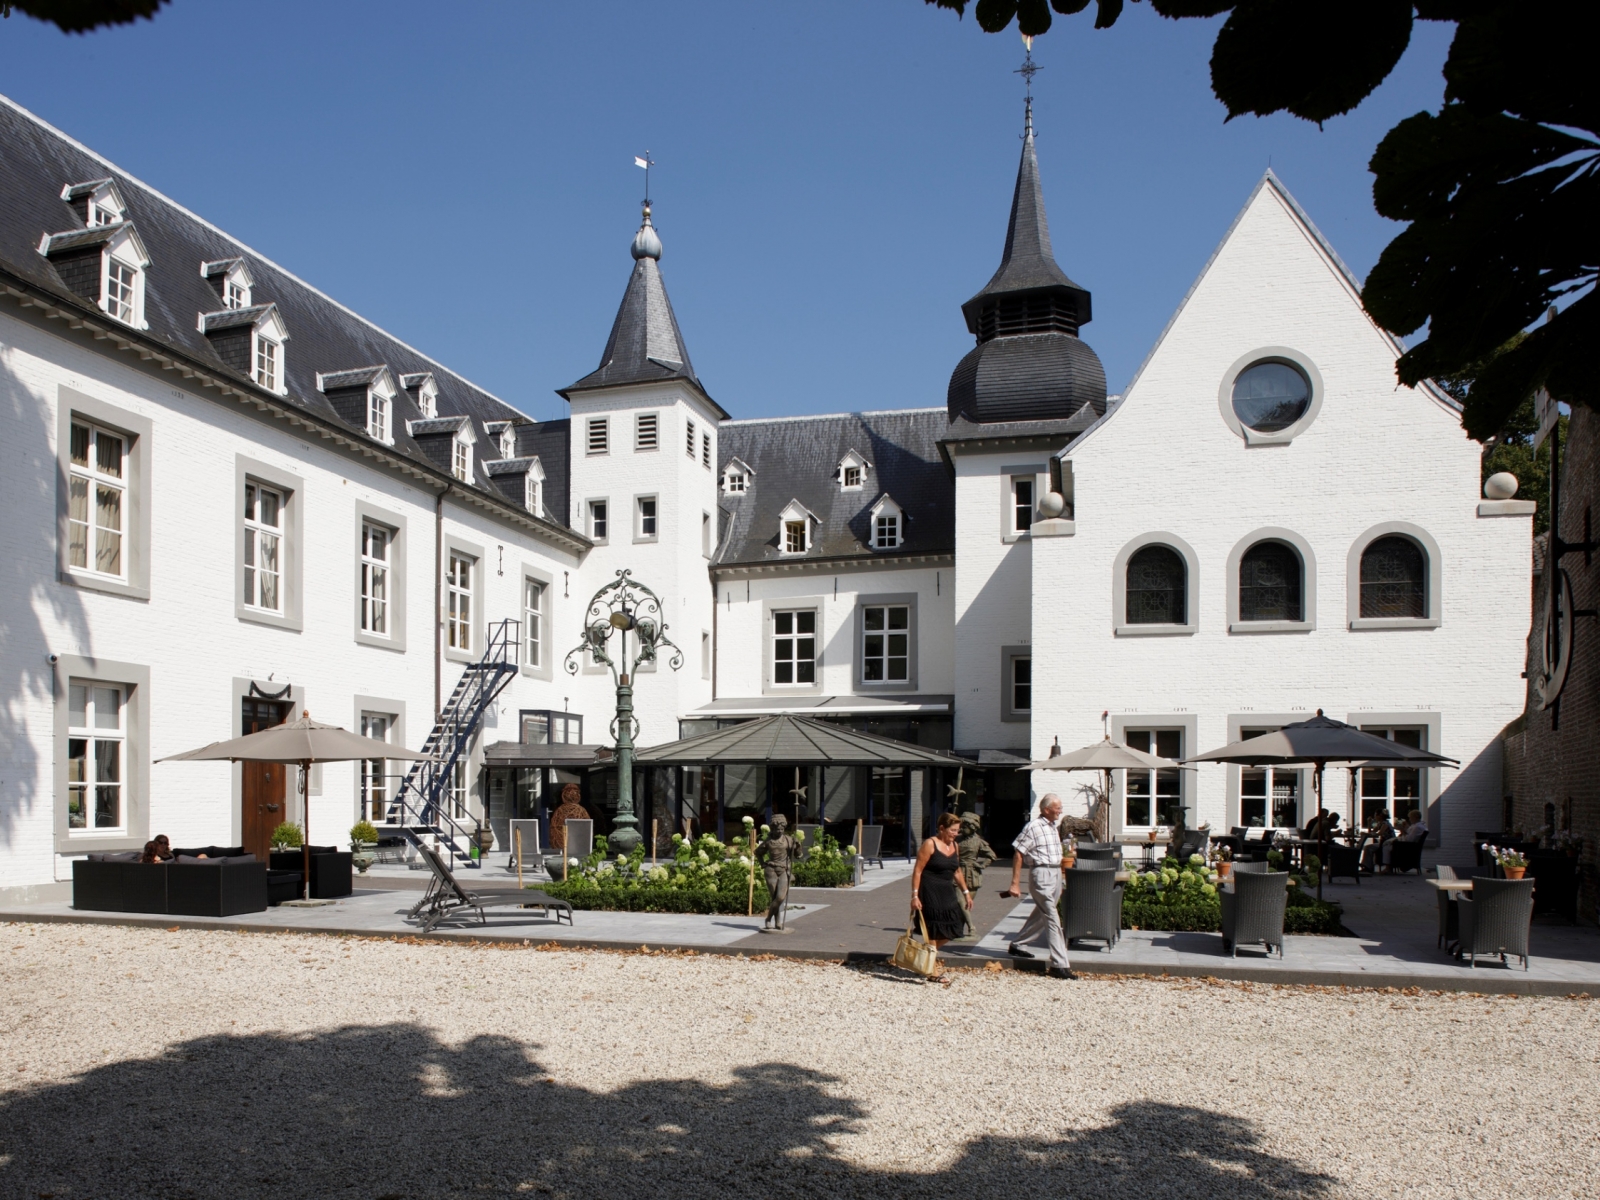 Kasteel Doenrade <br/>51.80 ew <br/> <a href='http://vakantieoplossing.nl/outpage/?id=885d02472130a5fb56f9164708ef97bb' target='_blank'>View Details</a>